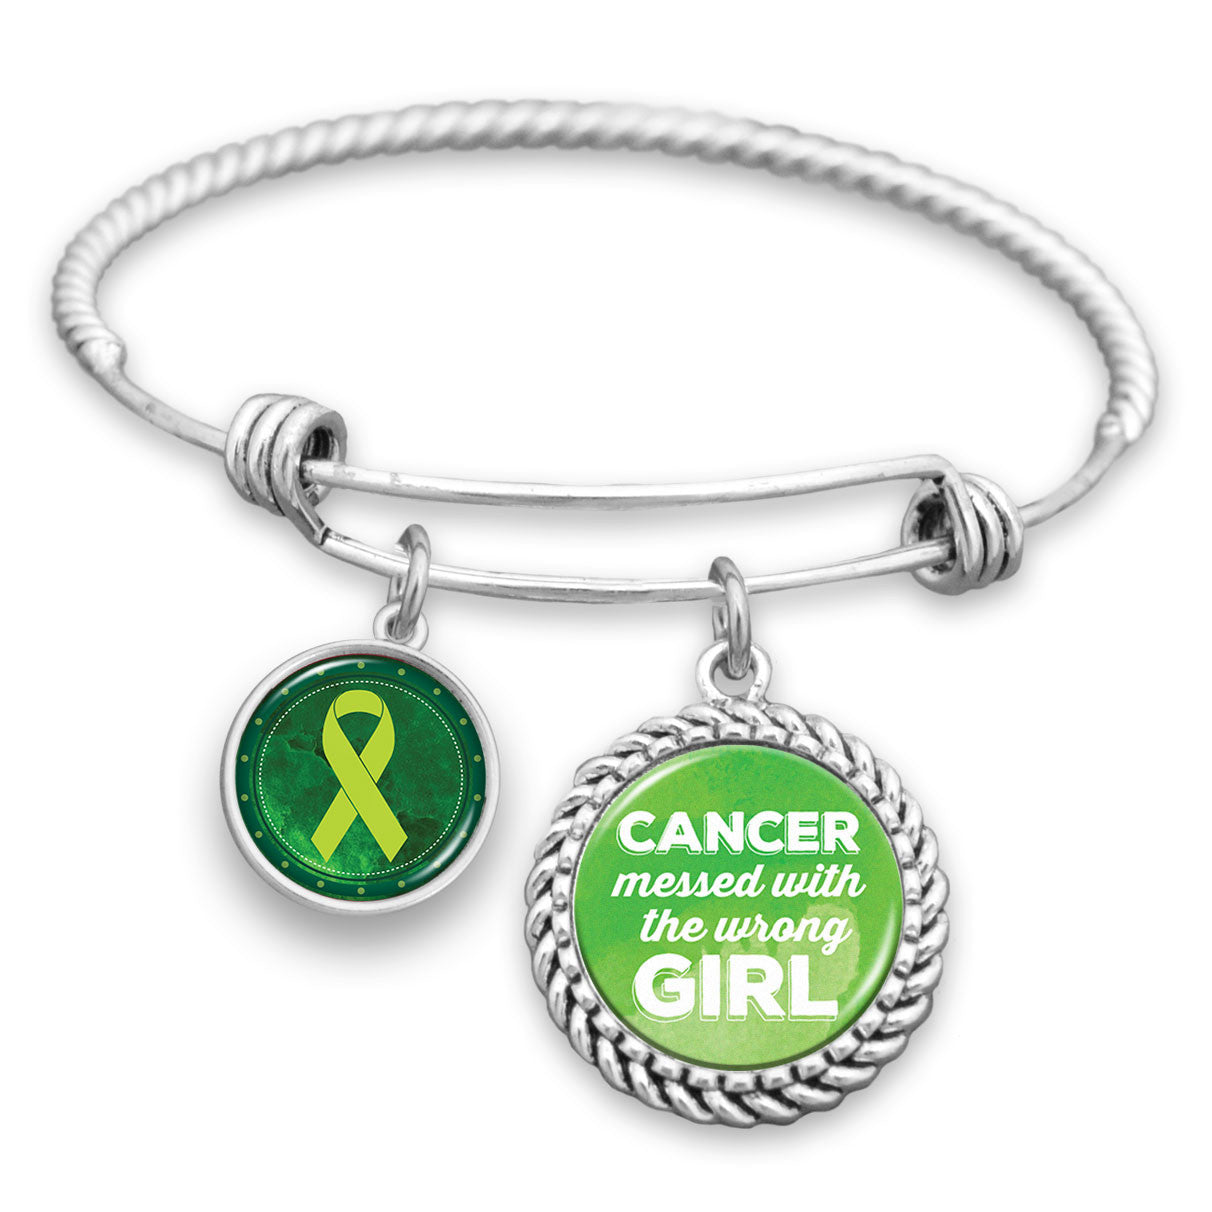 Lymphoma Awareness "Cancer Messed With The Wrong Girl" Charm Bracelet